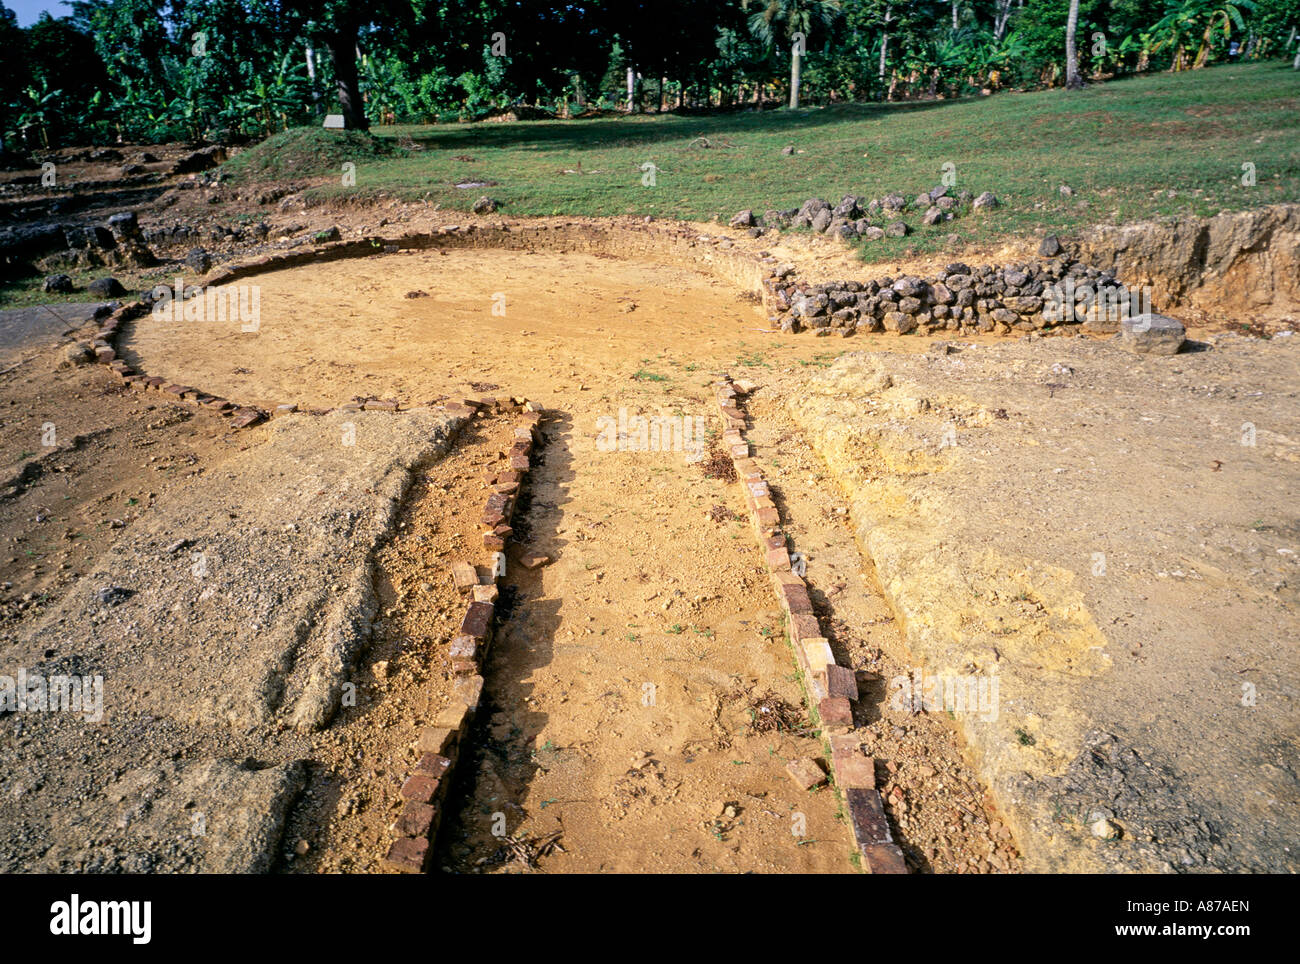 Remains of fortifications at the archaeological site of Concepción de la Vega near the town of La Vega Dominican Republic Stock Photo